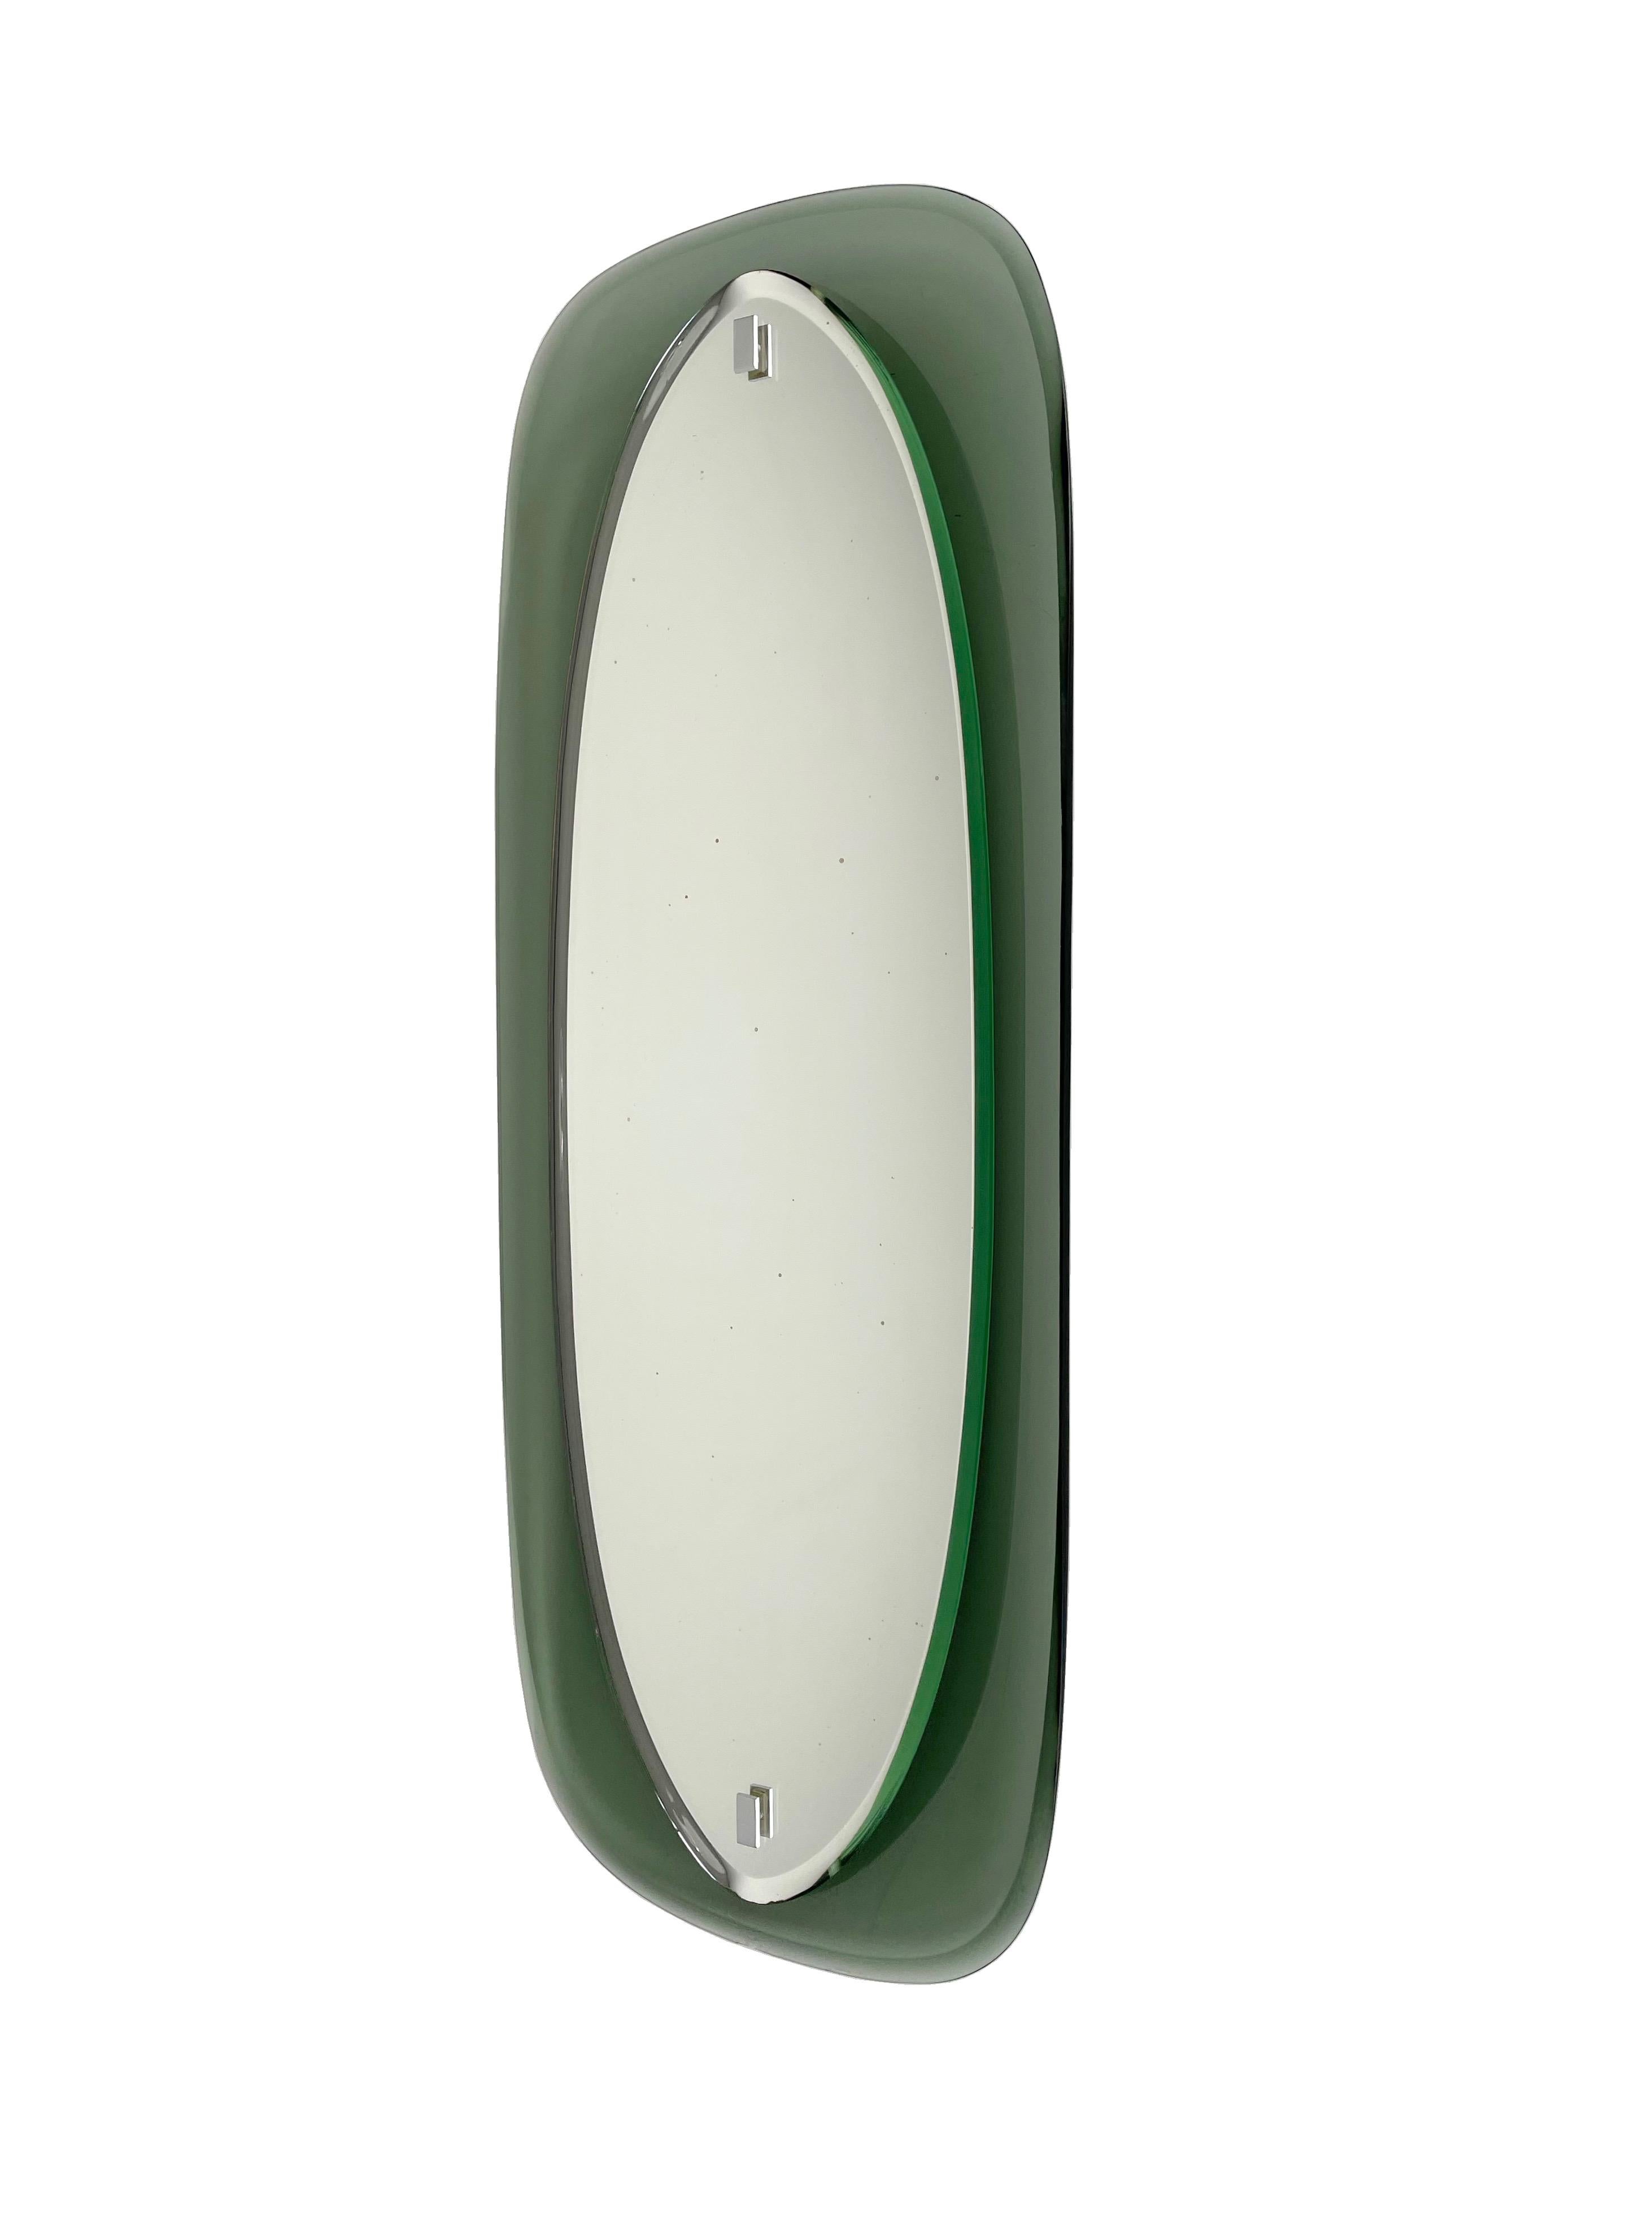 Mid-Century Modern wall mirror by Cristal Labor S.p.A. made in Italy in the 1960s. As shown in the pictures, it presents a light chipping on the bottom of the glass. 
The original label is still attached on the back of the mirror.